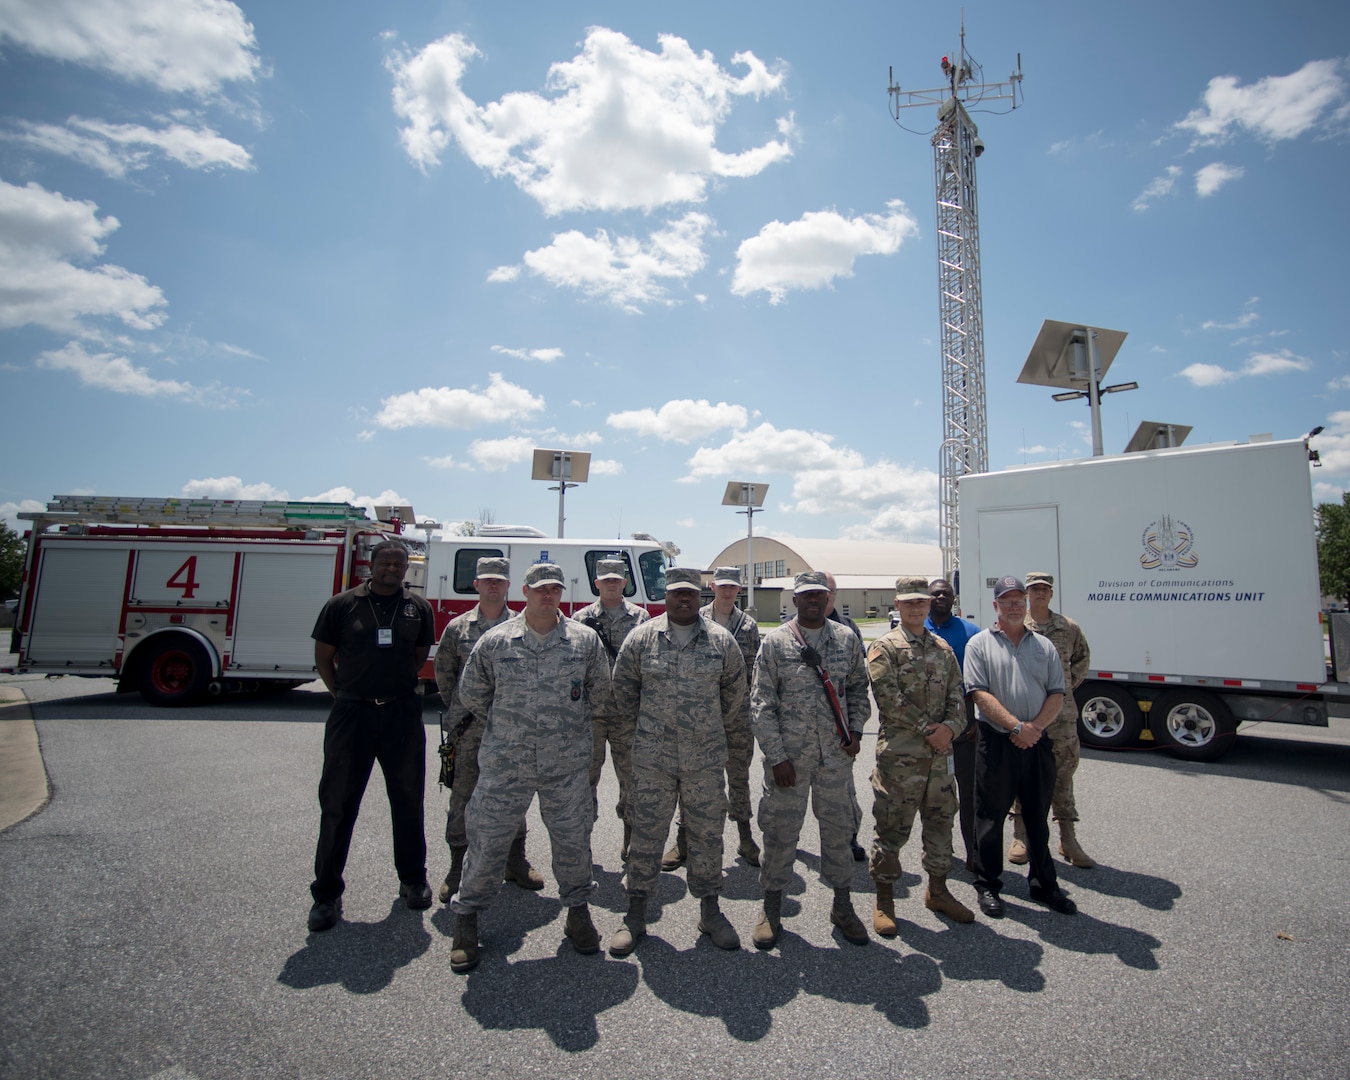 Members from the 166th Communications Flight and Delaware Department of Homeland Security’s Division of Communications a participated in a Site on Wheels deployment exercise, July 24, 2019 at New Castle Air National Guard Base, Del. The Site on Wheels deployment is a collaborative effort between the 166th CF and the DoC to give situational awareness of the civilian assets available for strategic and rapid expansion of radio frequency communications in the event of a domestic emergency or disaster. (U.S. Air National Guard Photo by Staff Sgt. Katherine Miller)